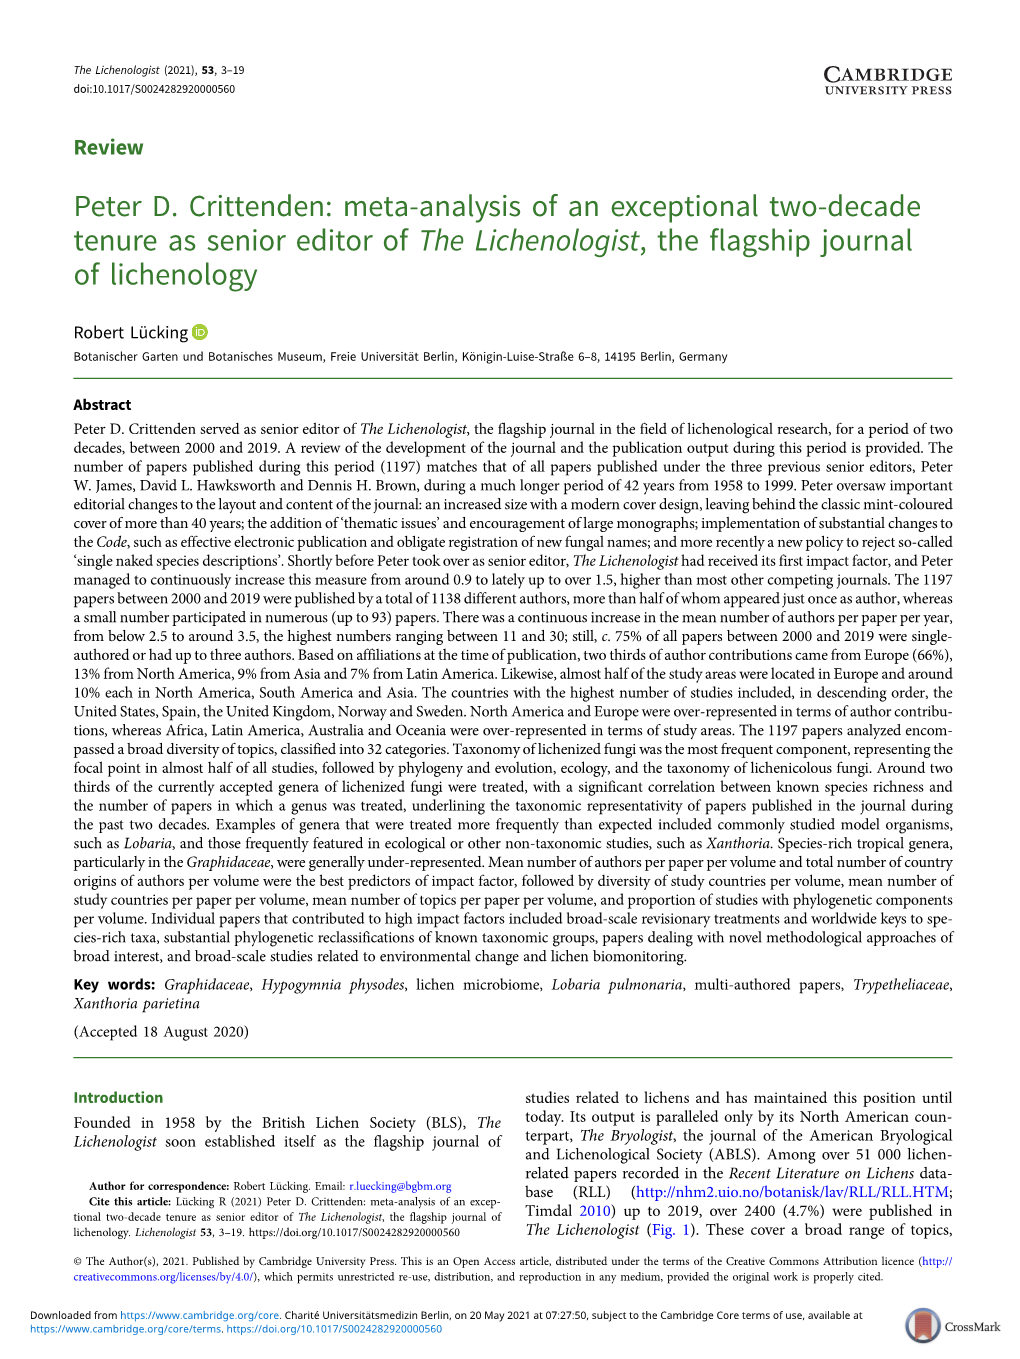 Peter D. Crittenden: Meta-Analysis of an Exceptional Two-Decade Tenure As Senior Editor of the Lichenologist, the Flagship Journal of Lichenology